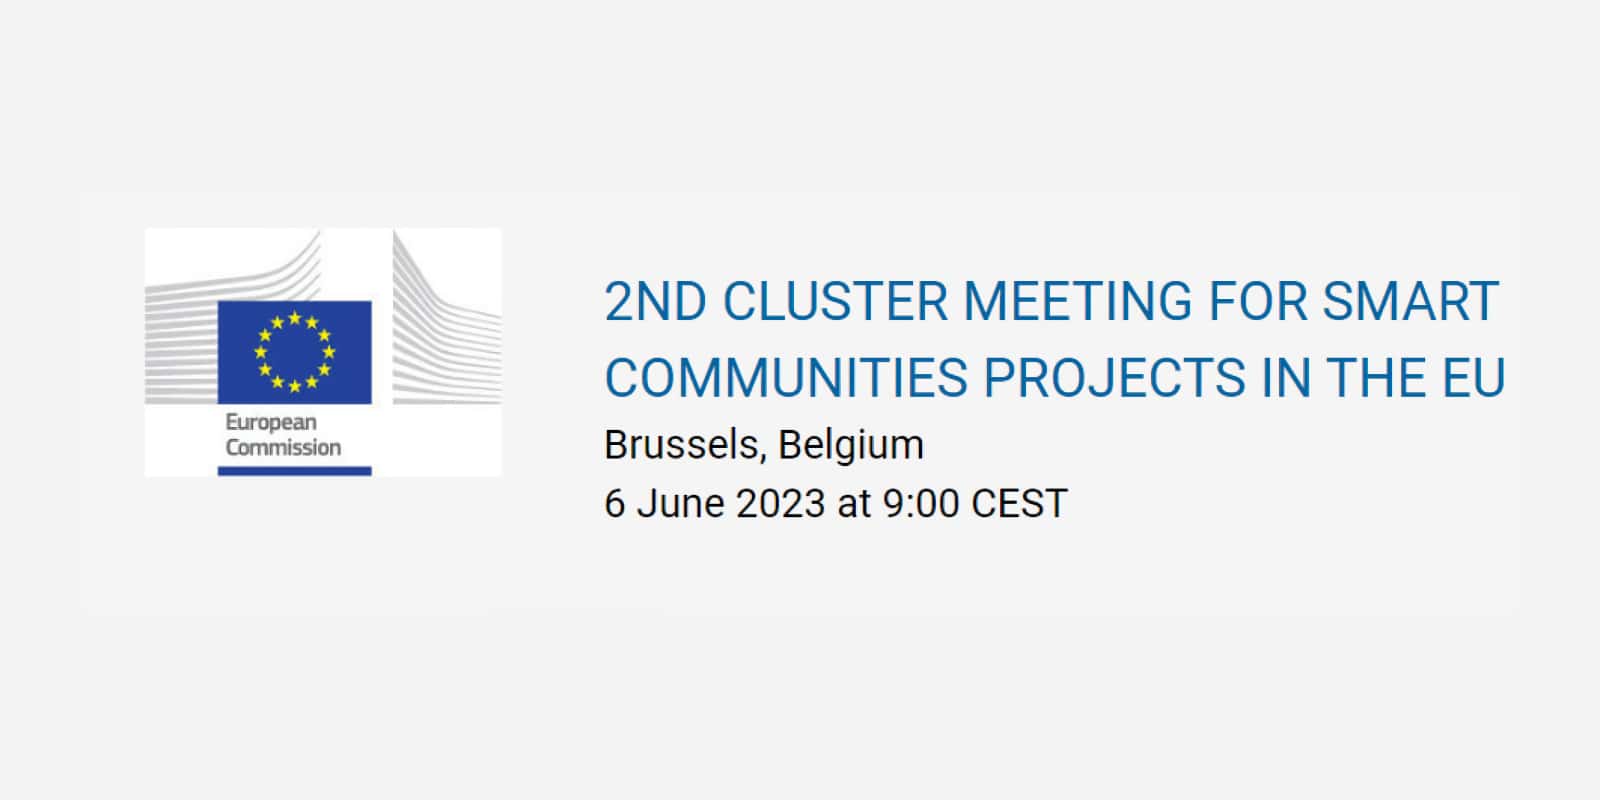 Second cluster meeting for smart communities projects in the EU